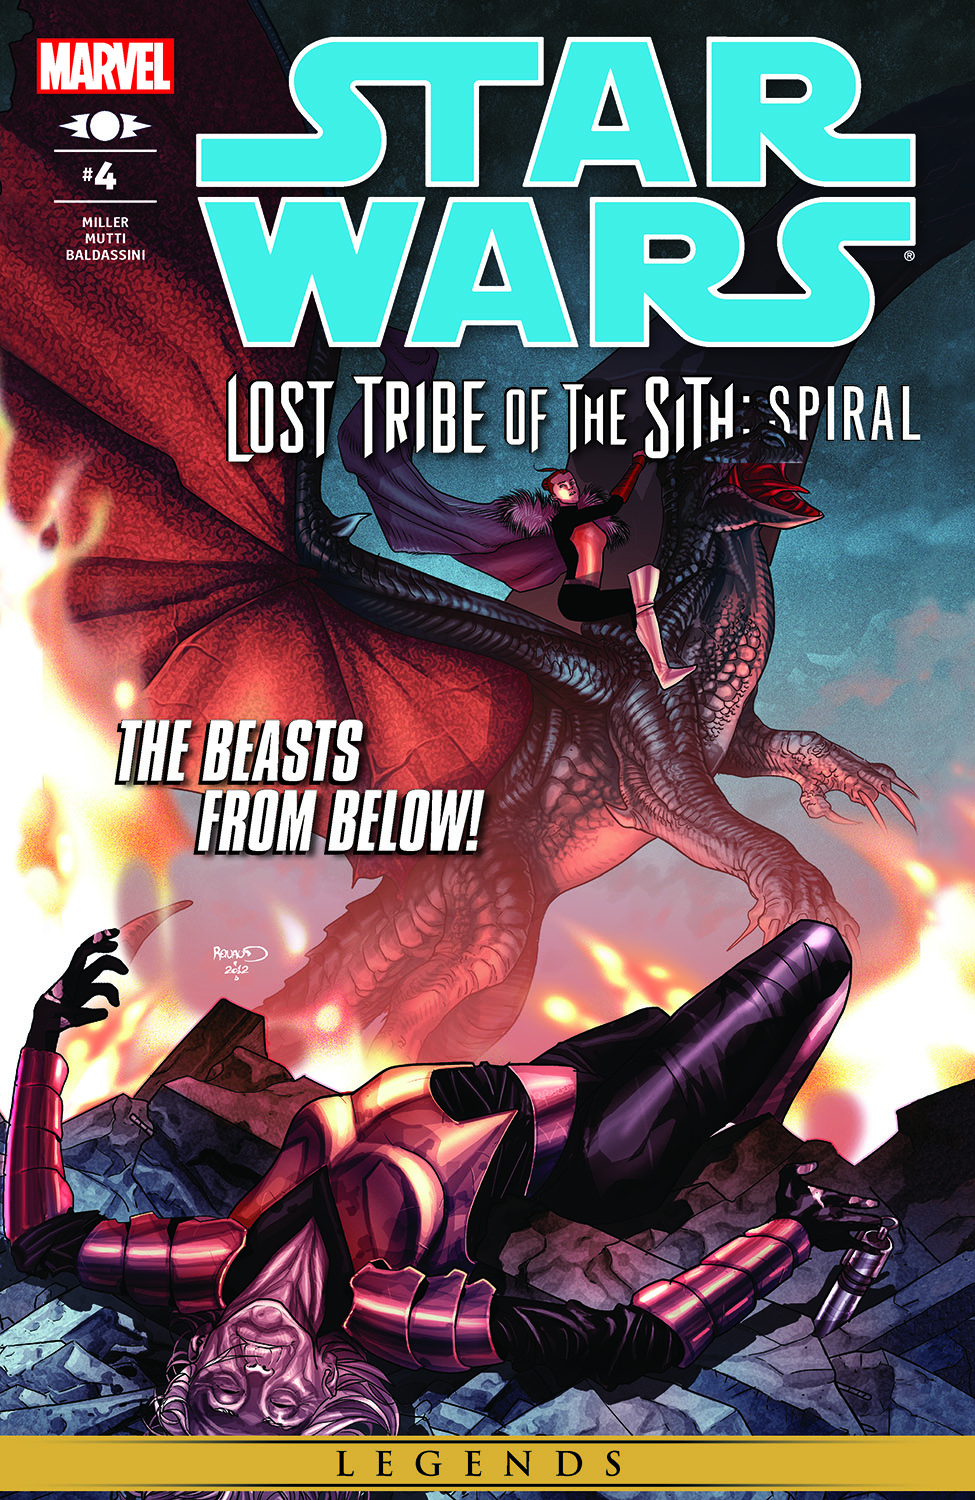 Star Wars: Lost Tribe of the Sith - Spiral (2012) #4